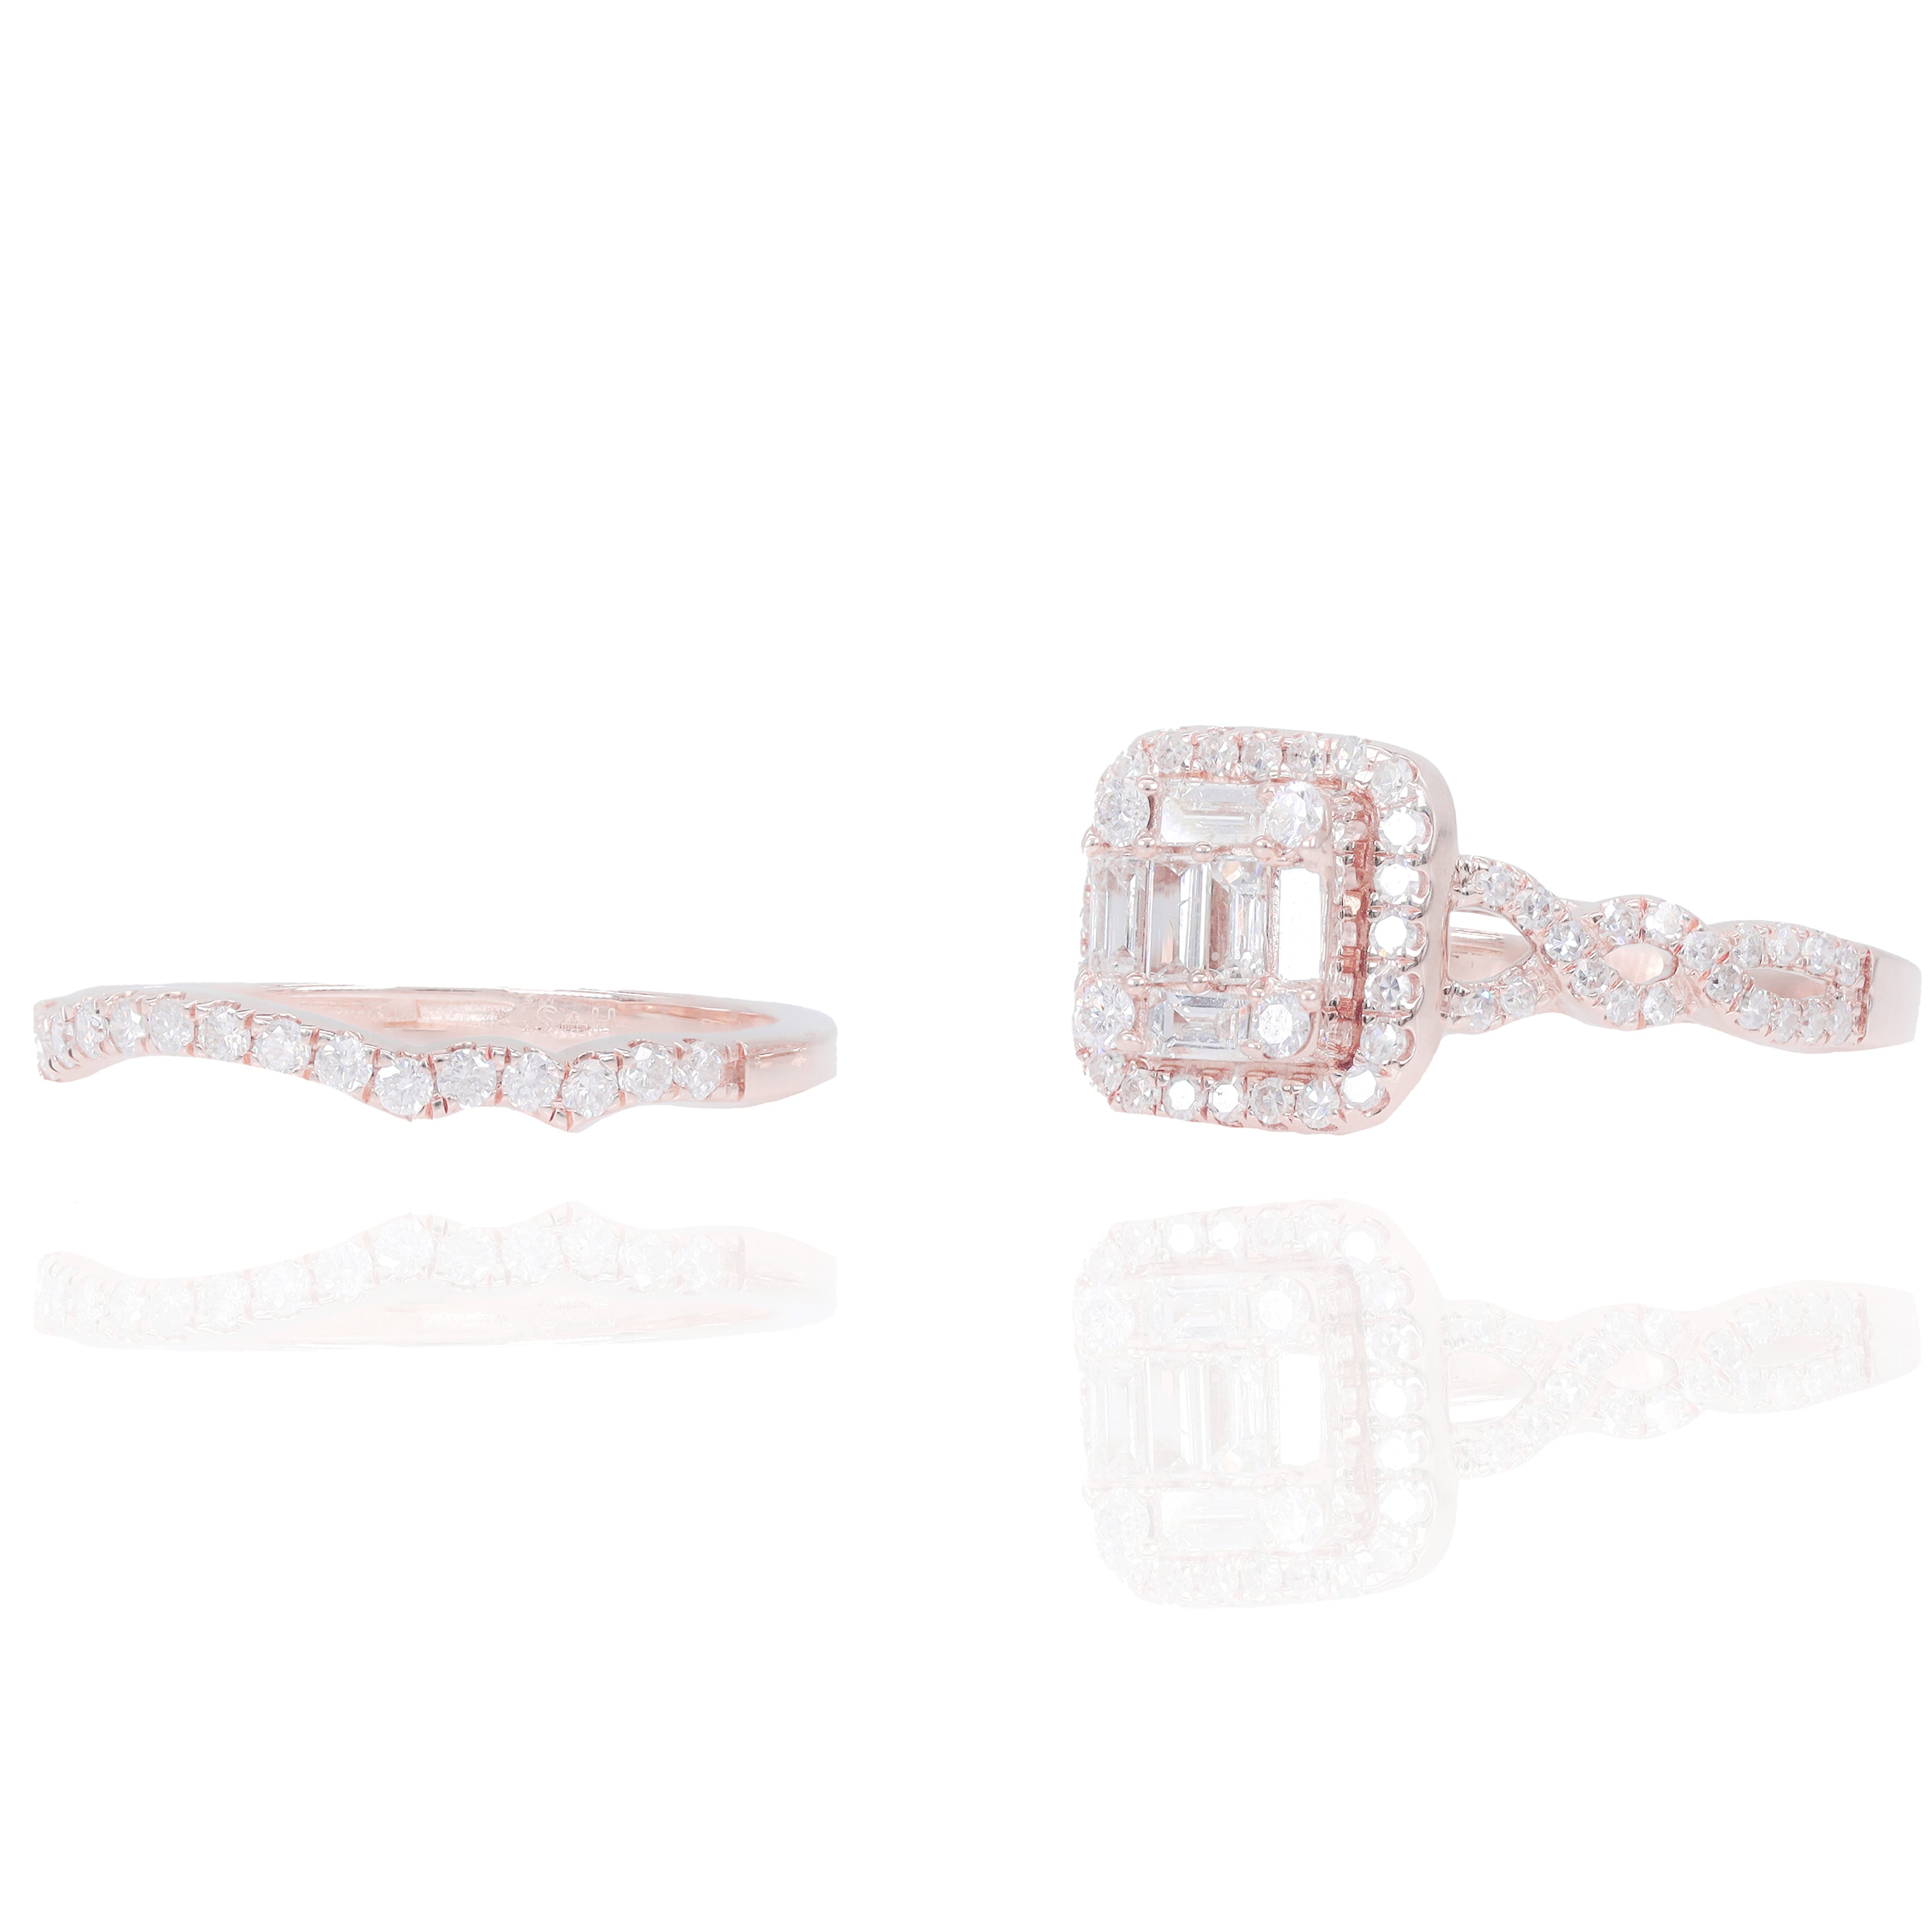 Princess Shaped Diamond Engagement Ring with Halo and Woven Shank & Band